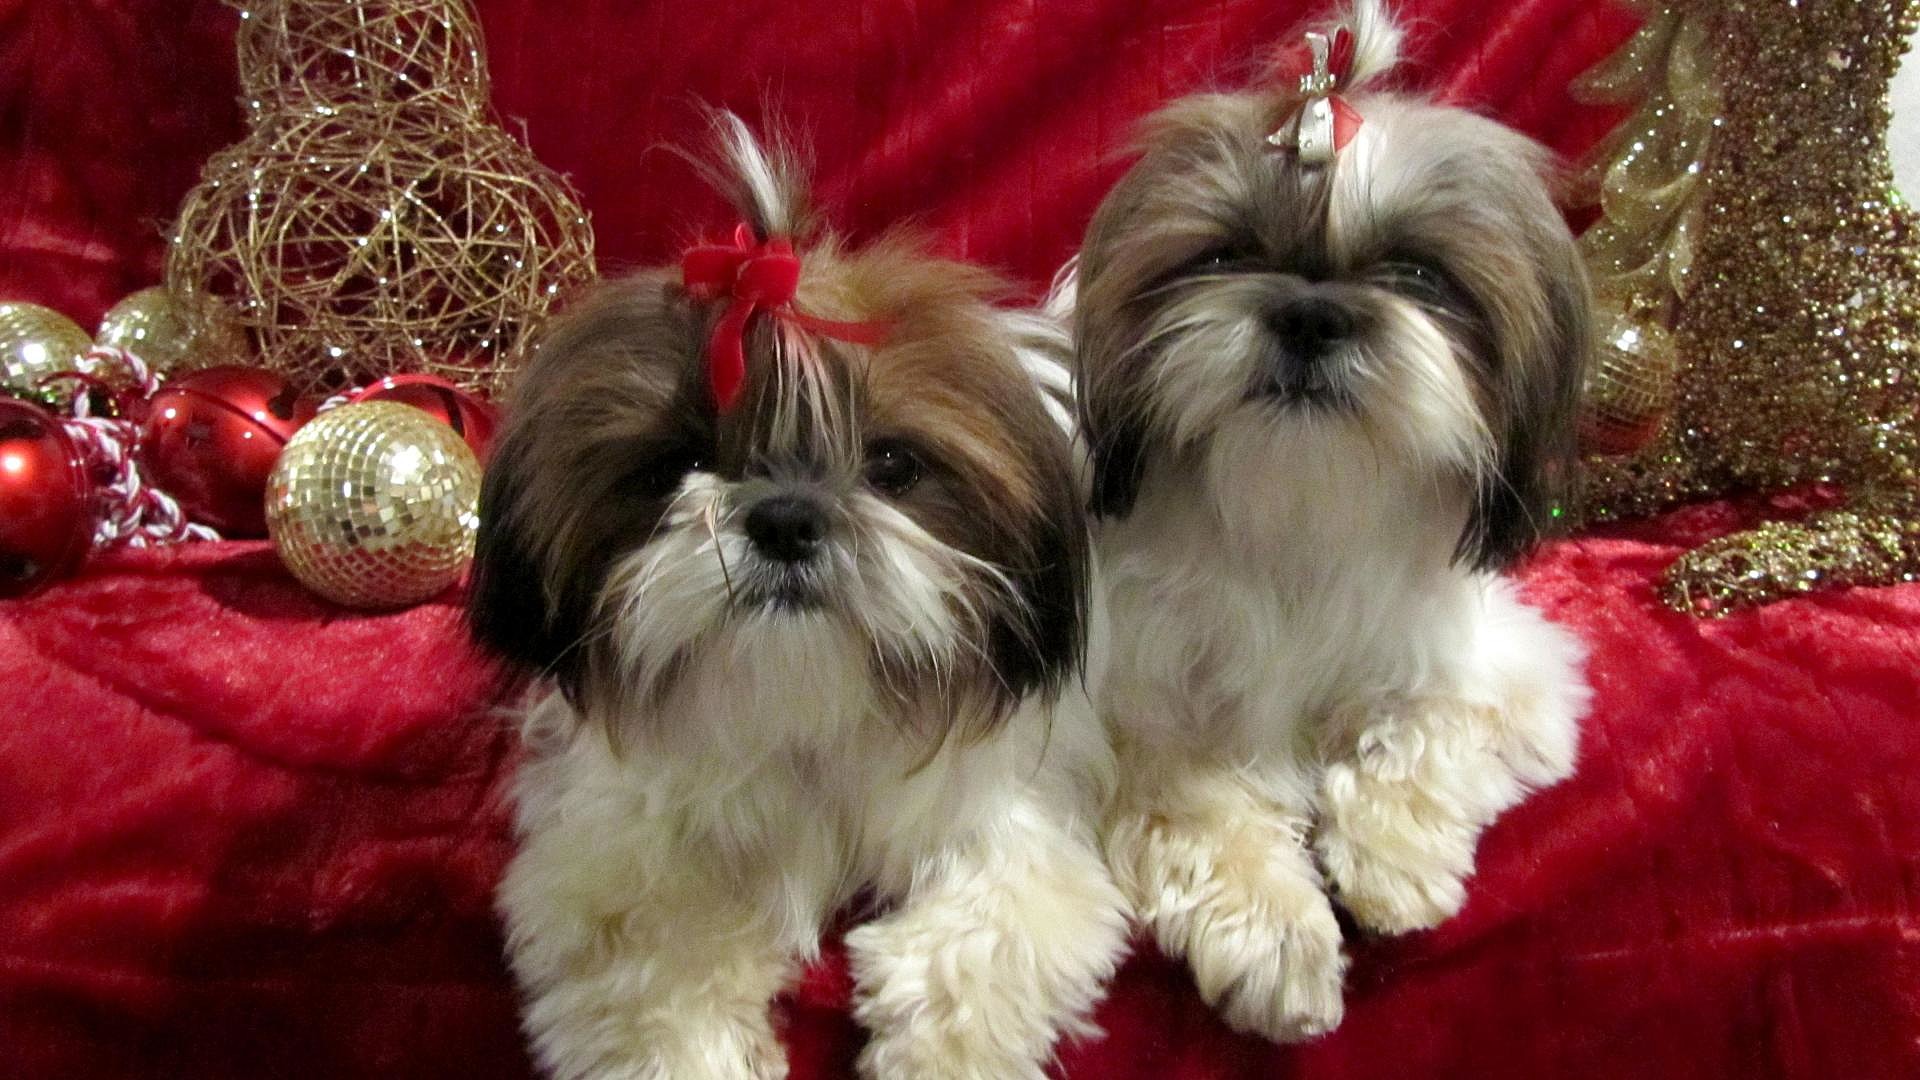 Shih Tzu at a Christmas party in 2015.